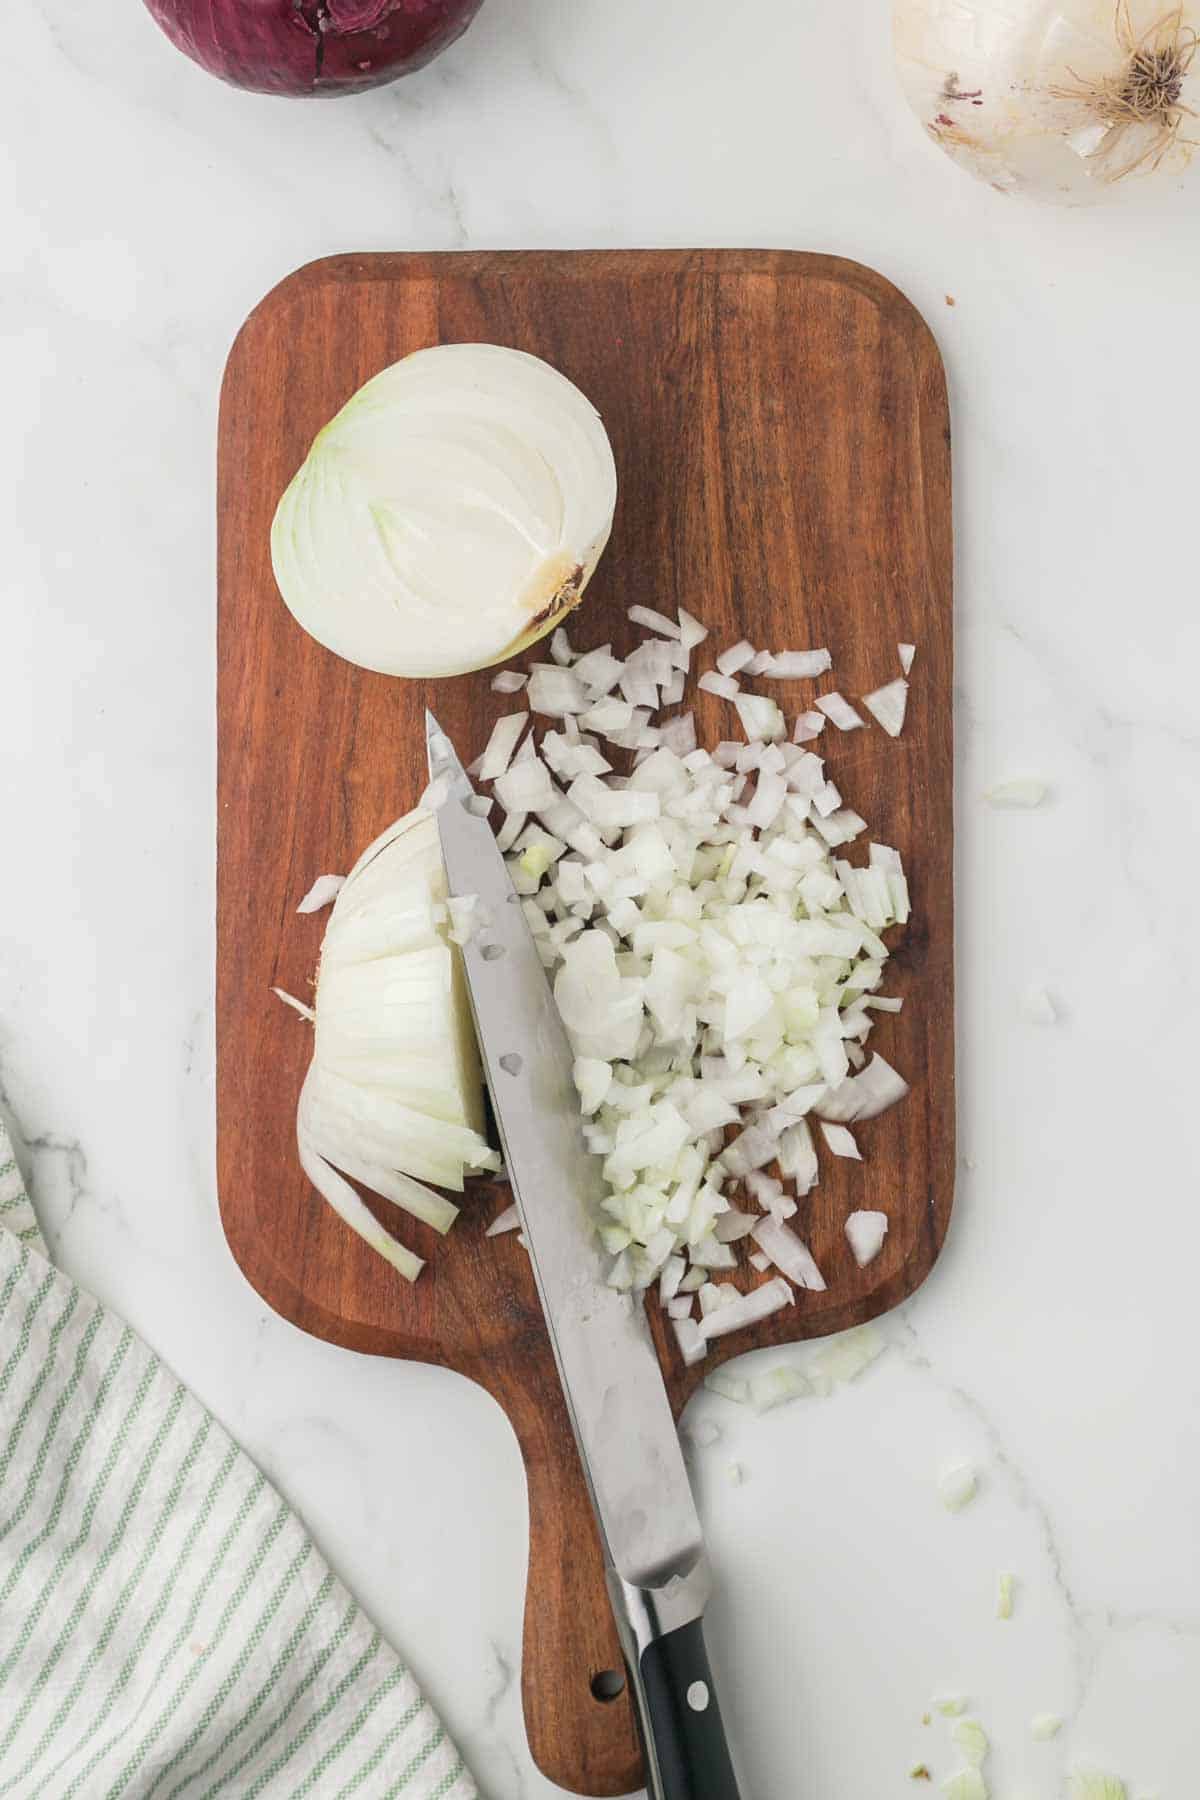 how to dice an onion, white onion on a wooden chopping block step by step